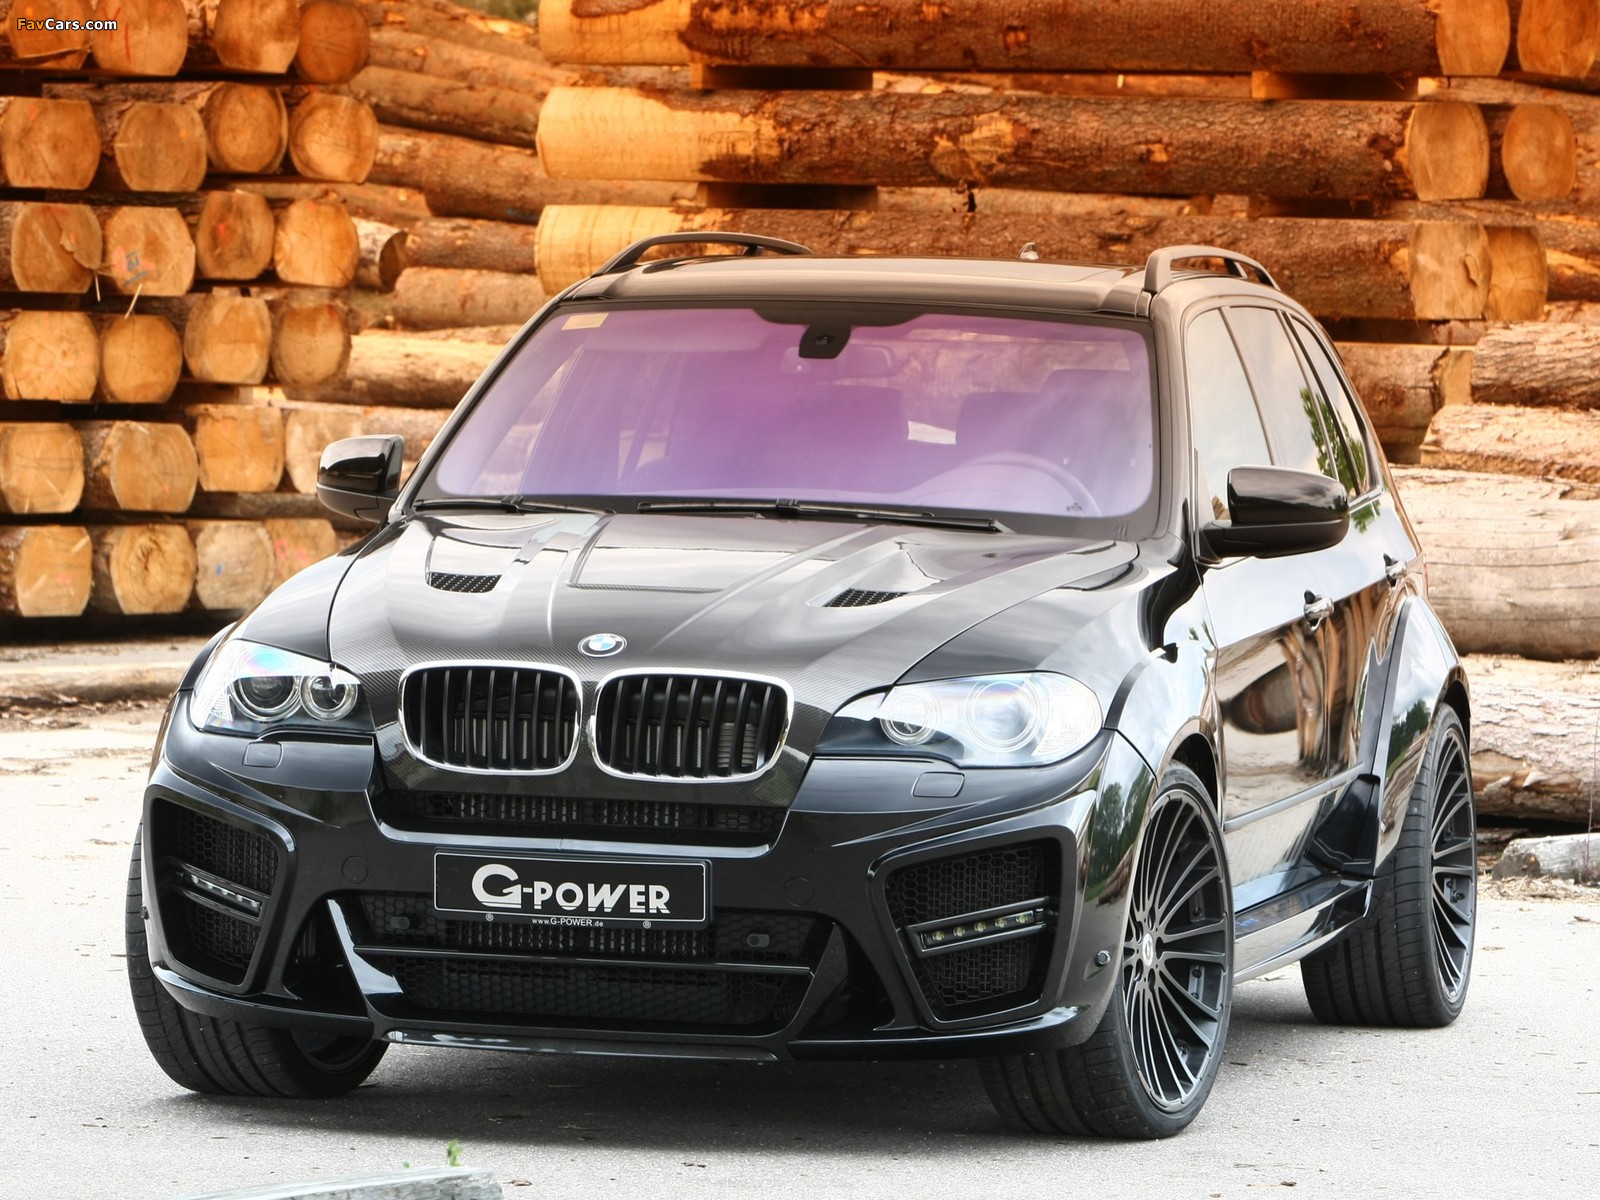 G-Power BMW X5 Typhoon (E70) 2009 pictures (1600 x 1200)